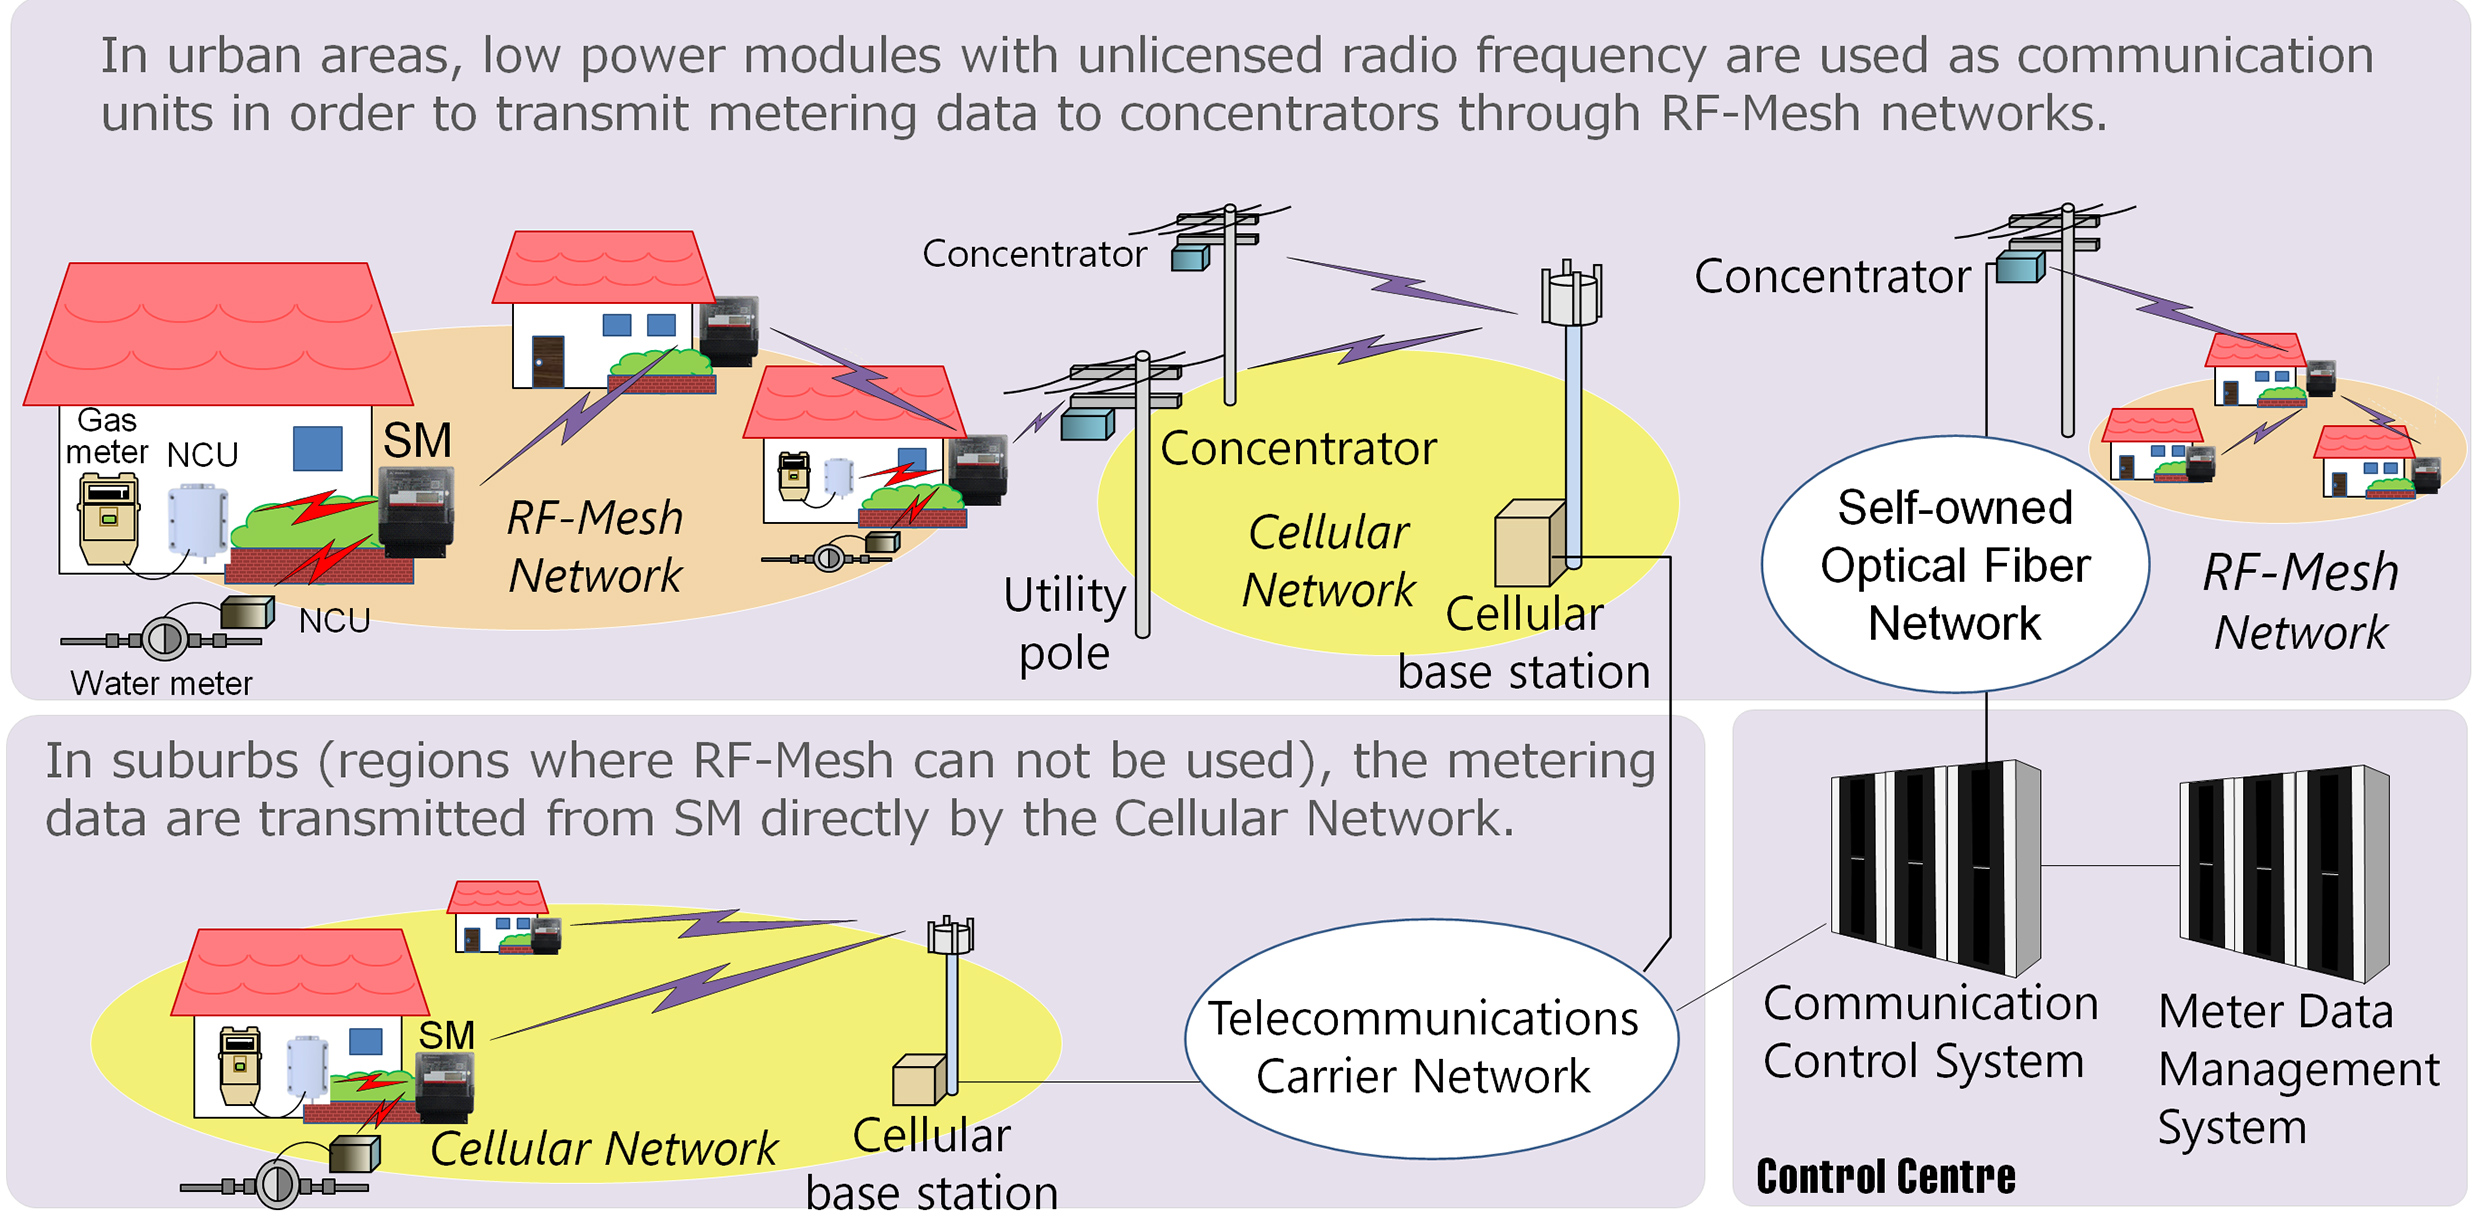 Overview of Communications Network for Smart Meter (SM)